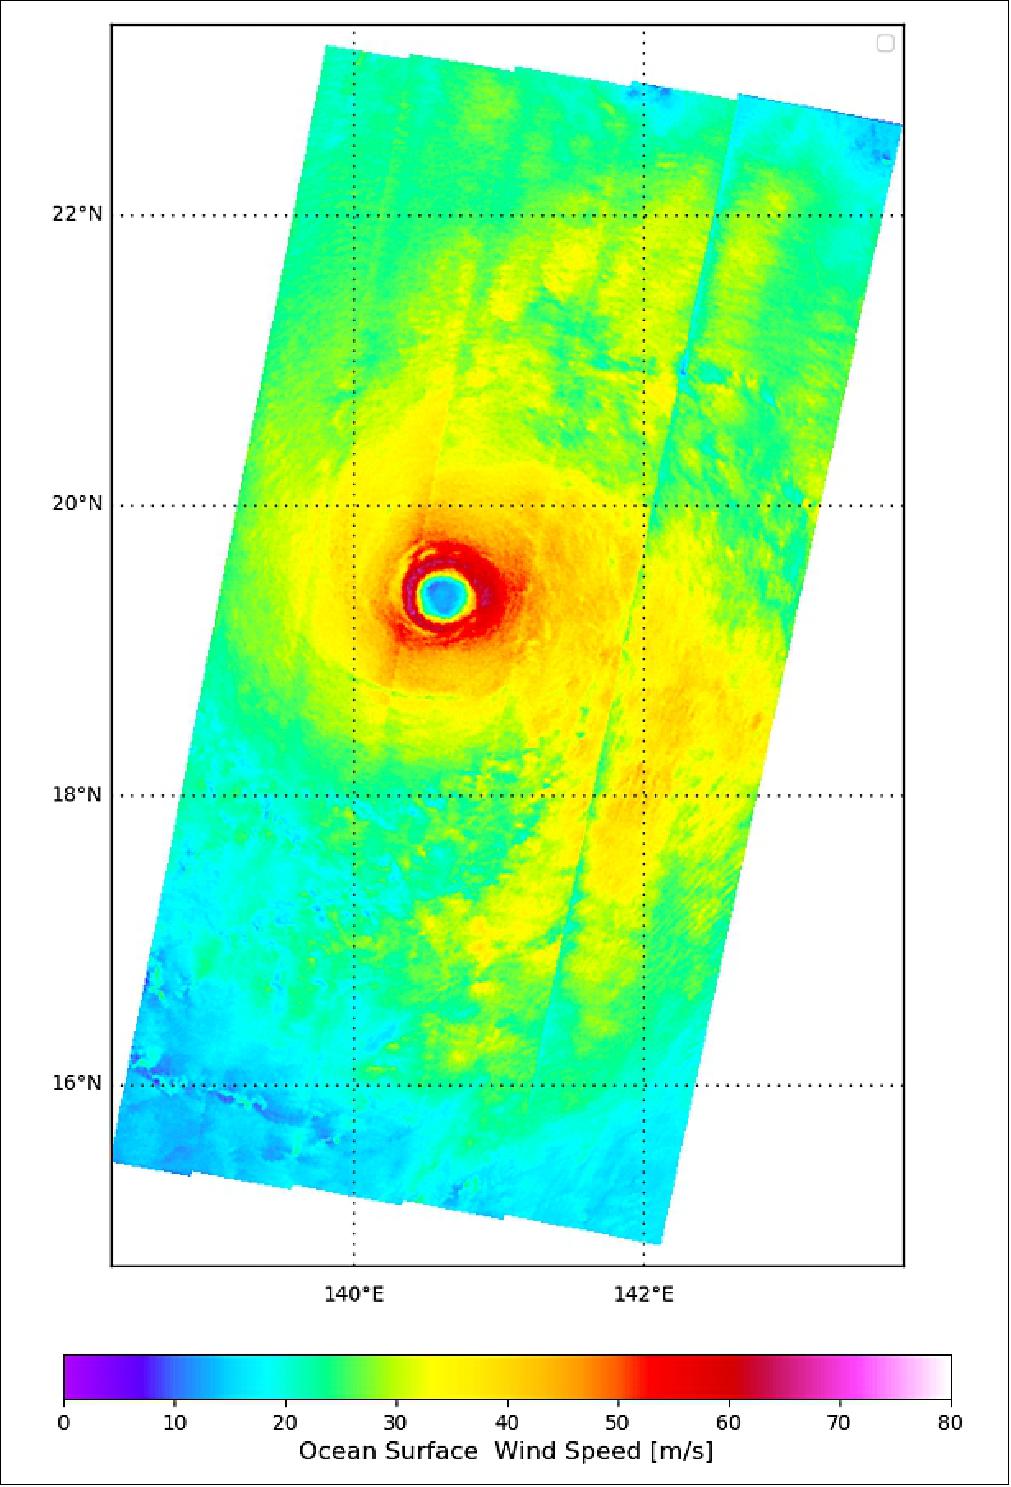 Figure 6: Hagibis -S1A, 8 October 2019 from 20:30:40 to 20:32:50 UTC: This image shows the ocean surface wind speed of Typhoon Hagibis derived from the Sentinel-1 radar measurements. The high resolution of Sentinel-1 provides an unprecedented detailed insight of the cyclone inner core structure, in particular the eye’s diameter, the radius of maximum winds and the maximum wind speed. In the case of Typhoon Hagibis, on 8 October the Sentinel-1 satellite measured the eye’s diameter at the sea surface as 20 km, the radius of maximum wind speed was 25 km and the maximum wind speed was greater than 60 m/s (image credit: ESA, the image contains modified Copernicus Sentinel data (2019)/Processed by IFREMER)